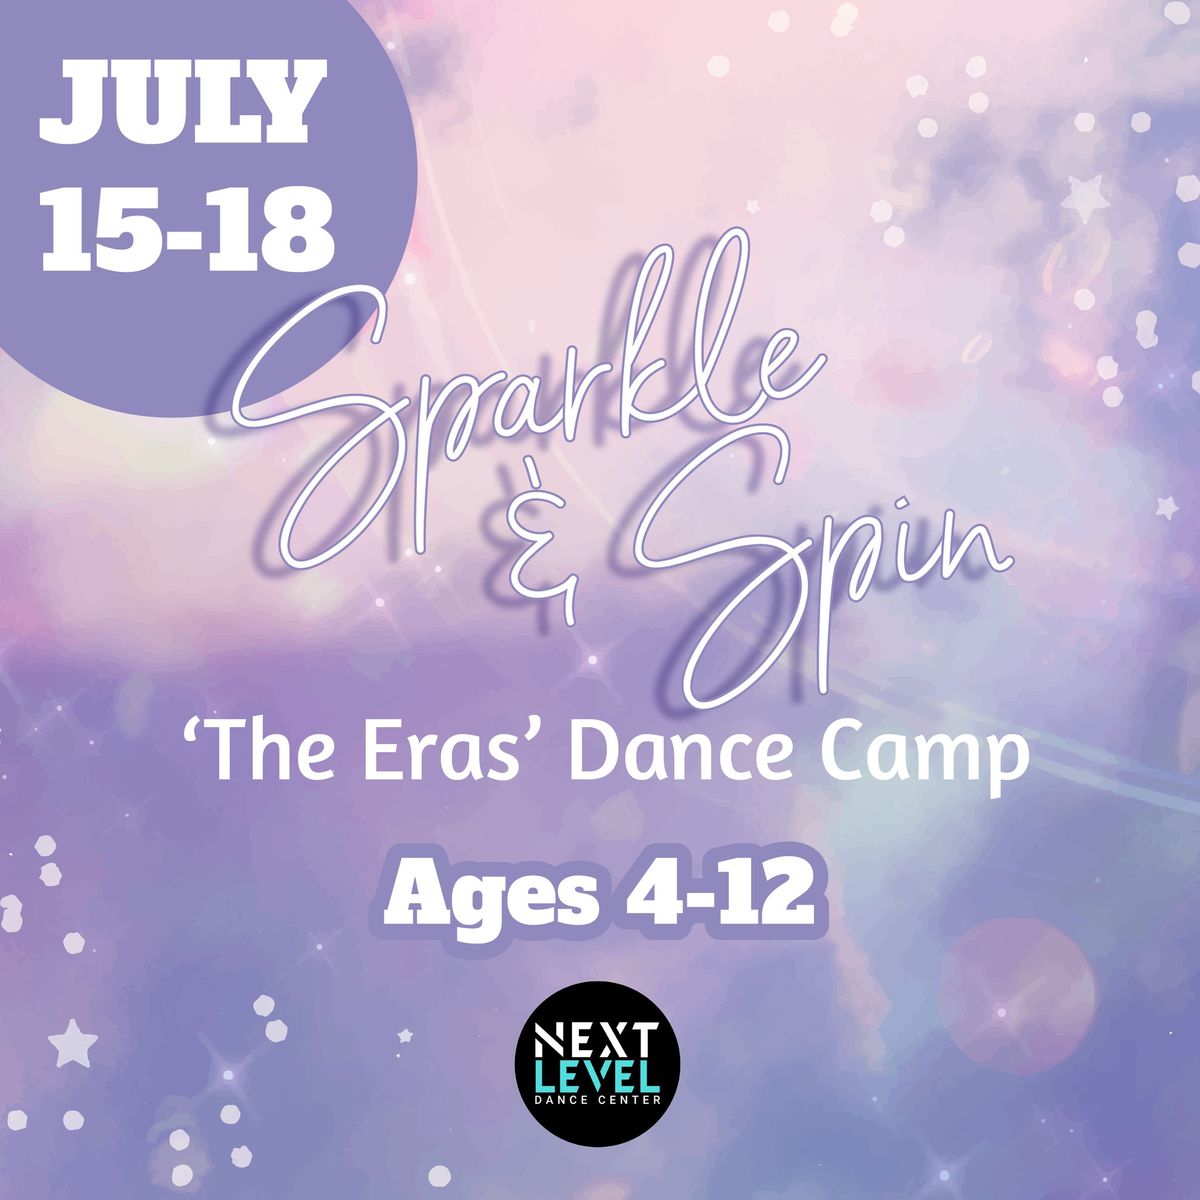 Sparkle & Spin! 'The Eras' Dance Camp (ages 4-12)